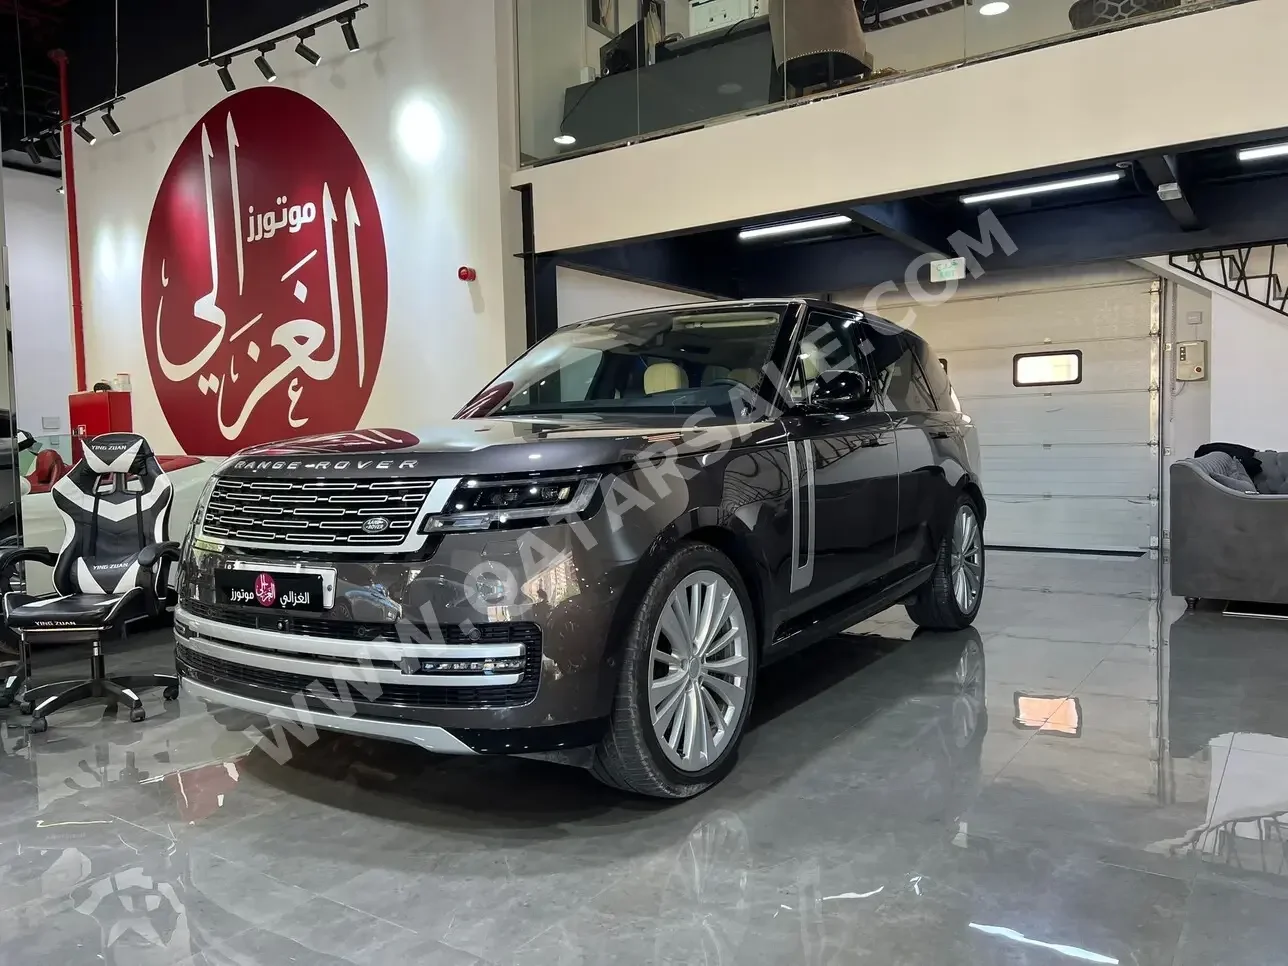  Land Rover  Range Rover  Vogue First Edition  2023  Automatic  9,000 Km  8 Cylinder  Four Wheel Drive (4WD)  SUV  Brown  With Warranty